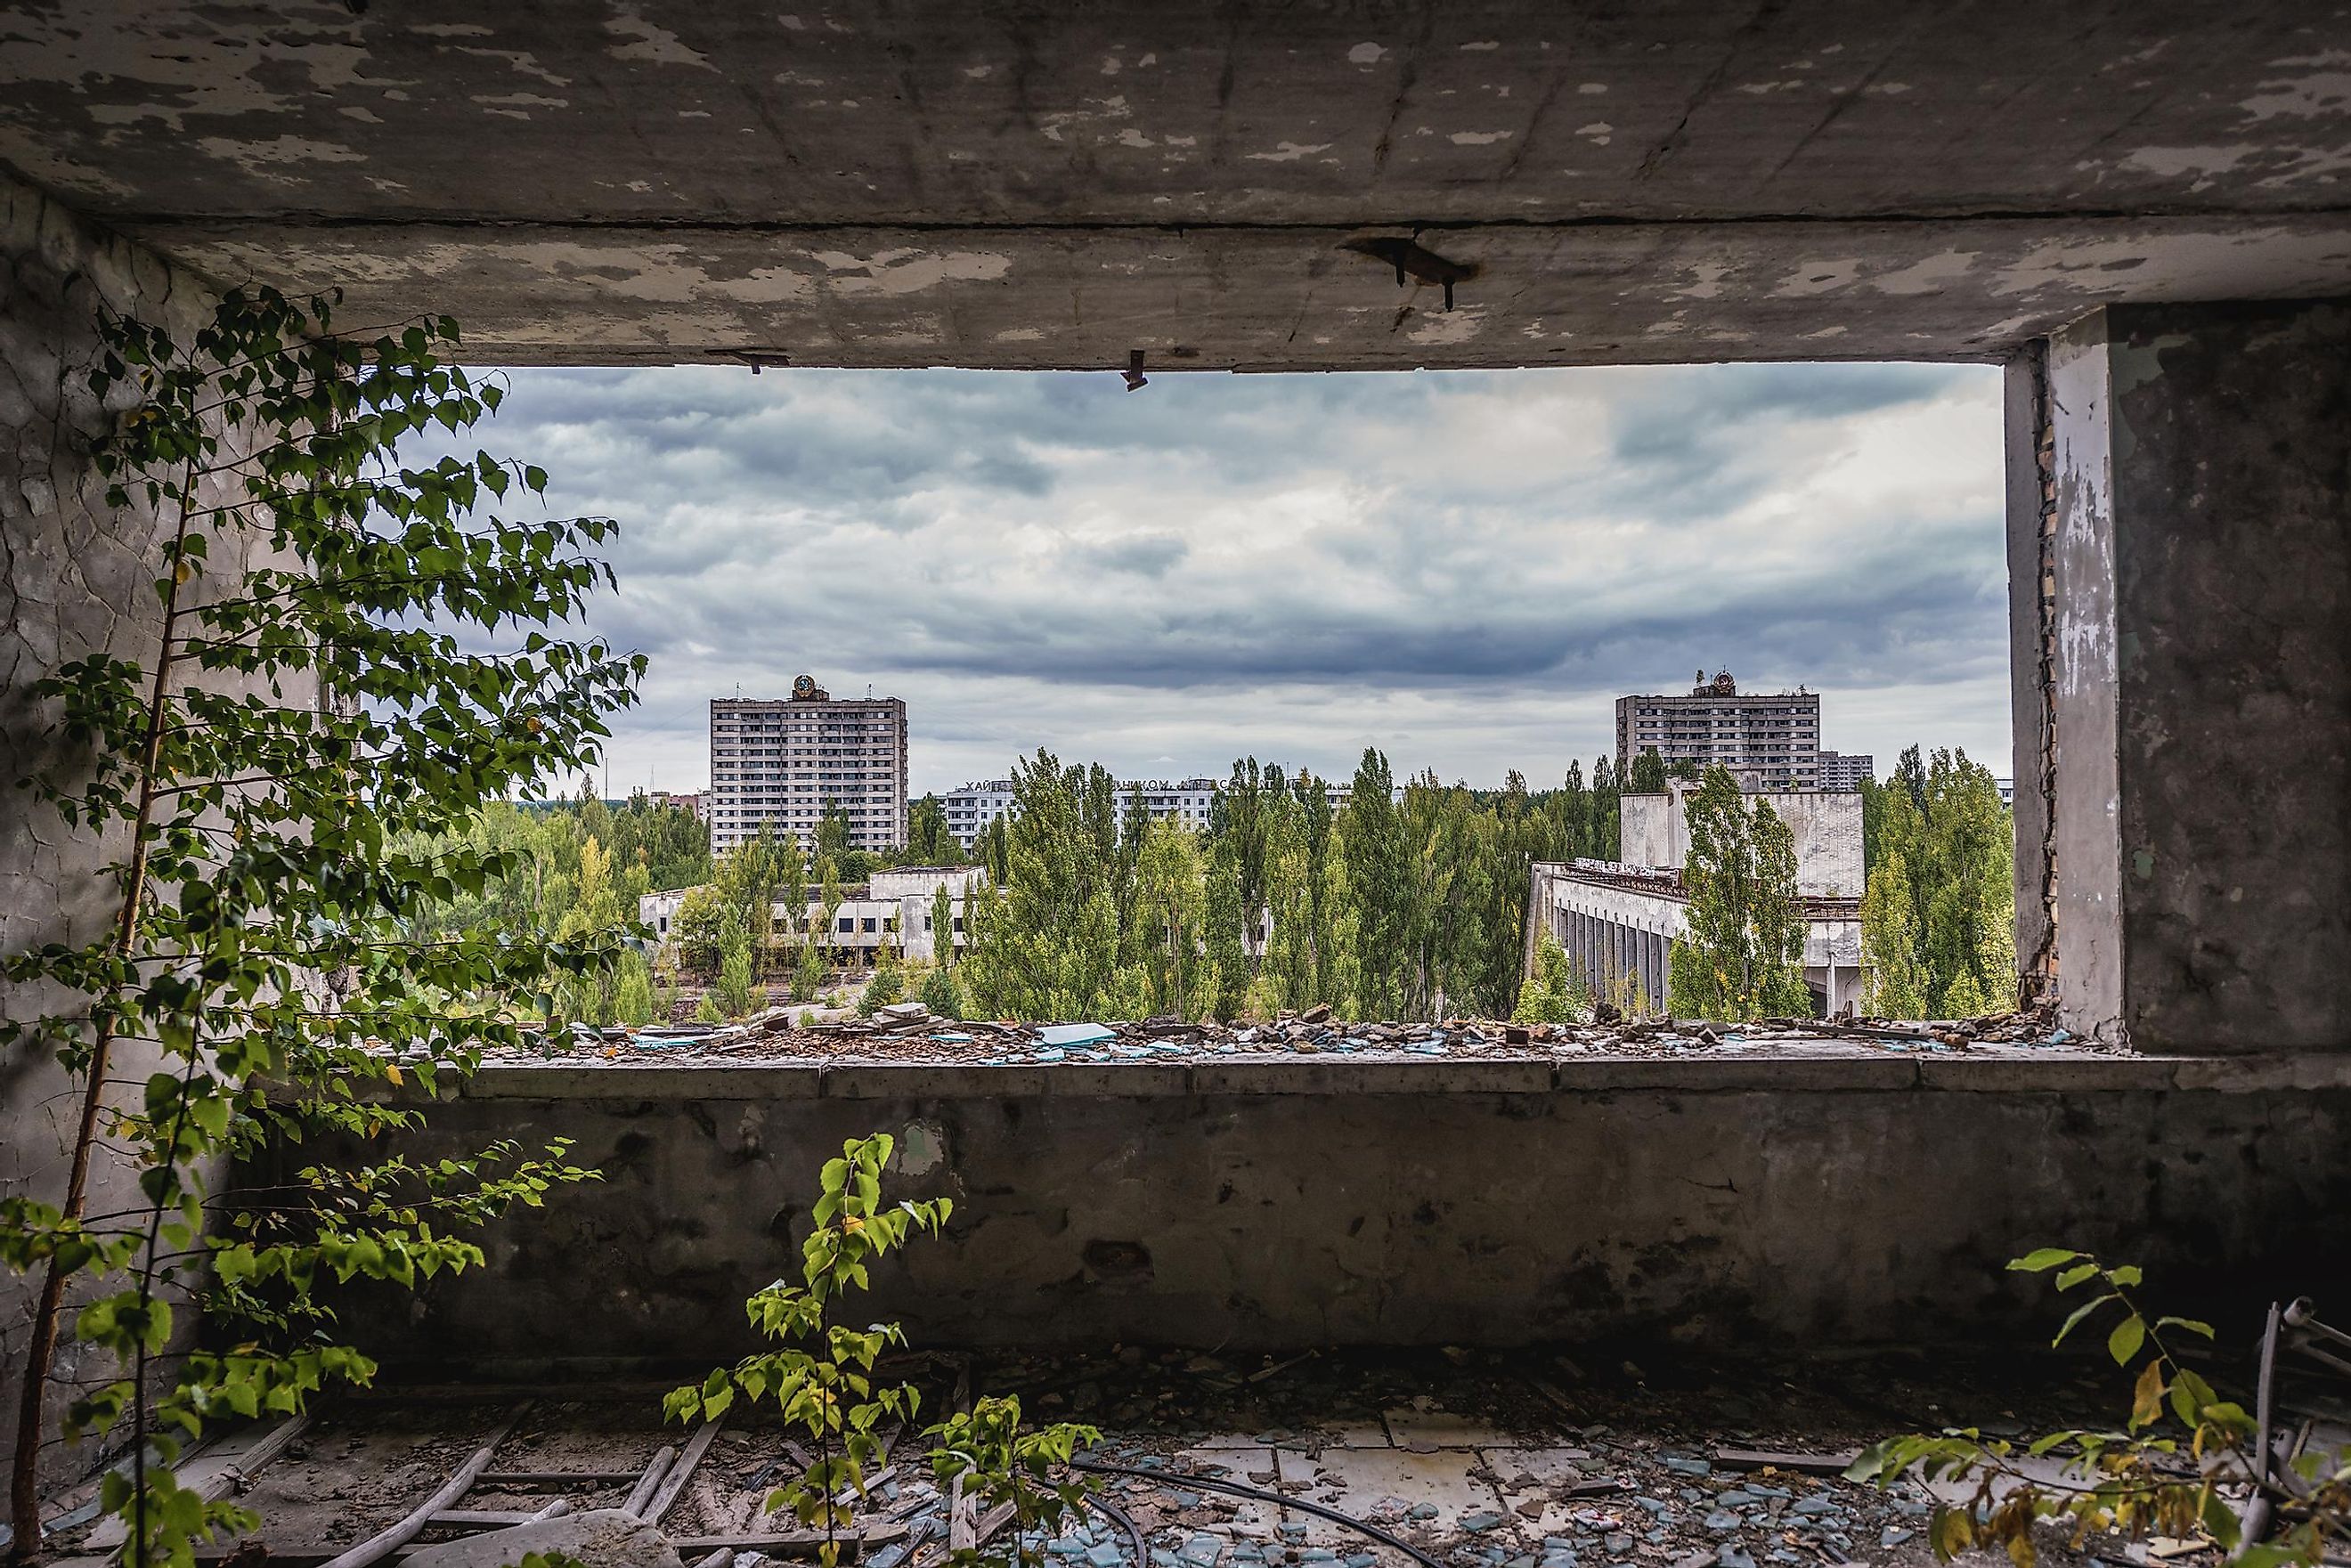 Inside the abandoned hotel in Pripyat city, located within the Chernobyl Exclusion Zone, Ukraine.